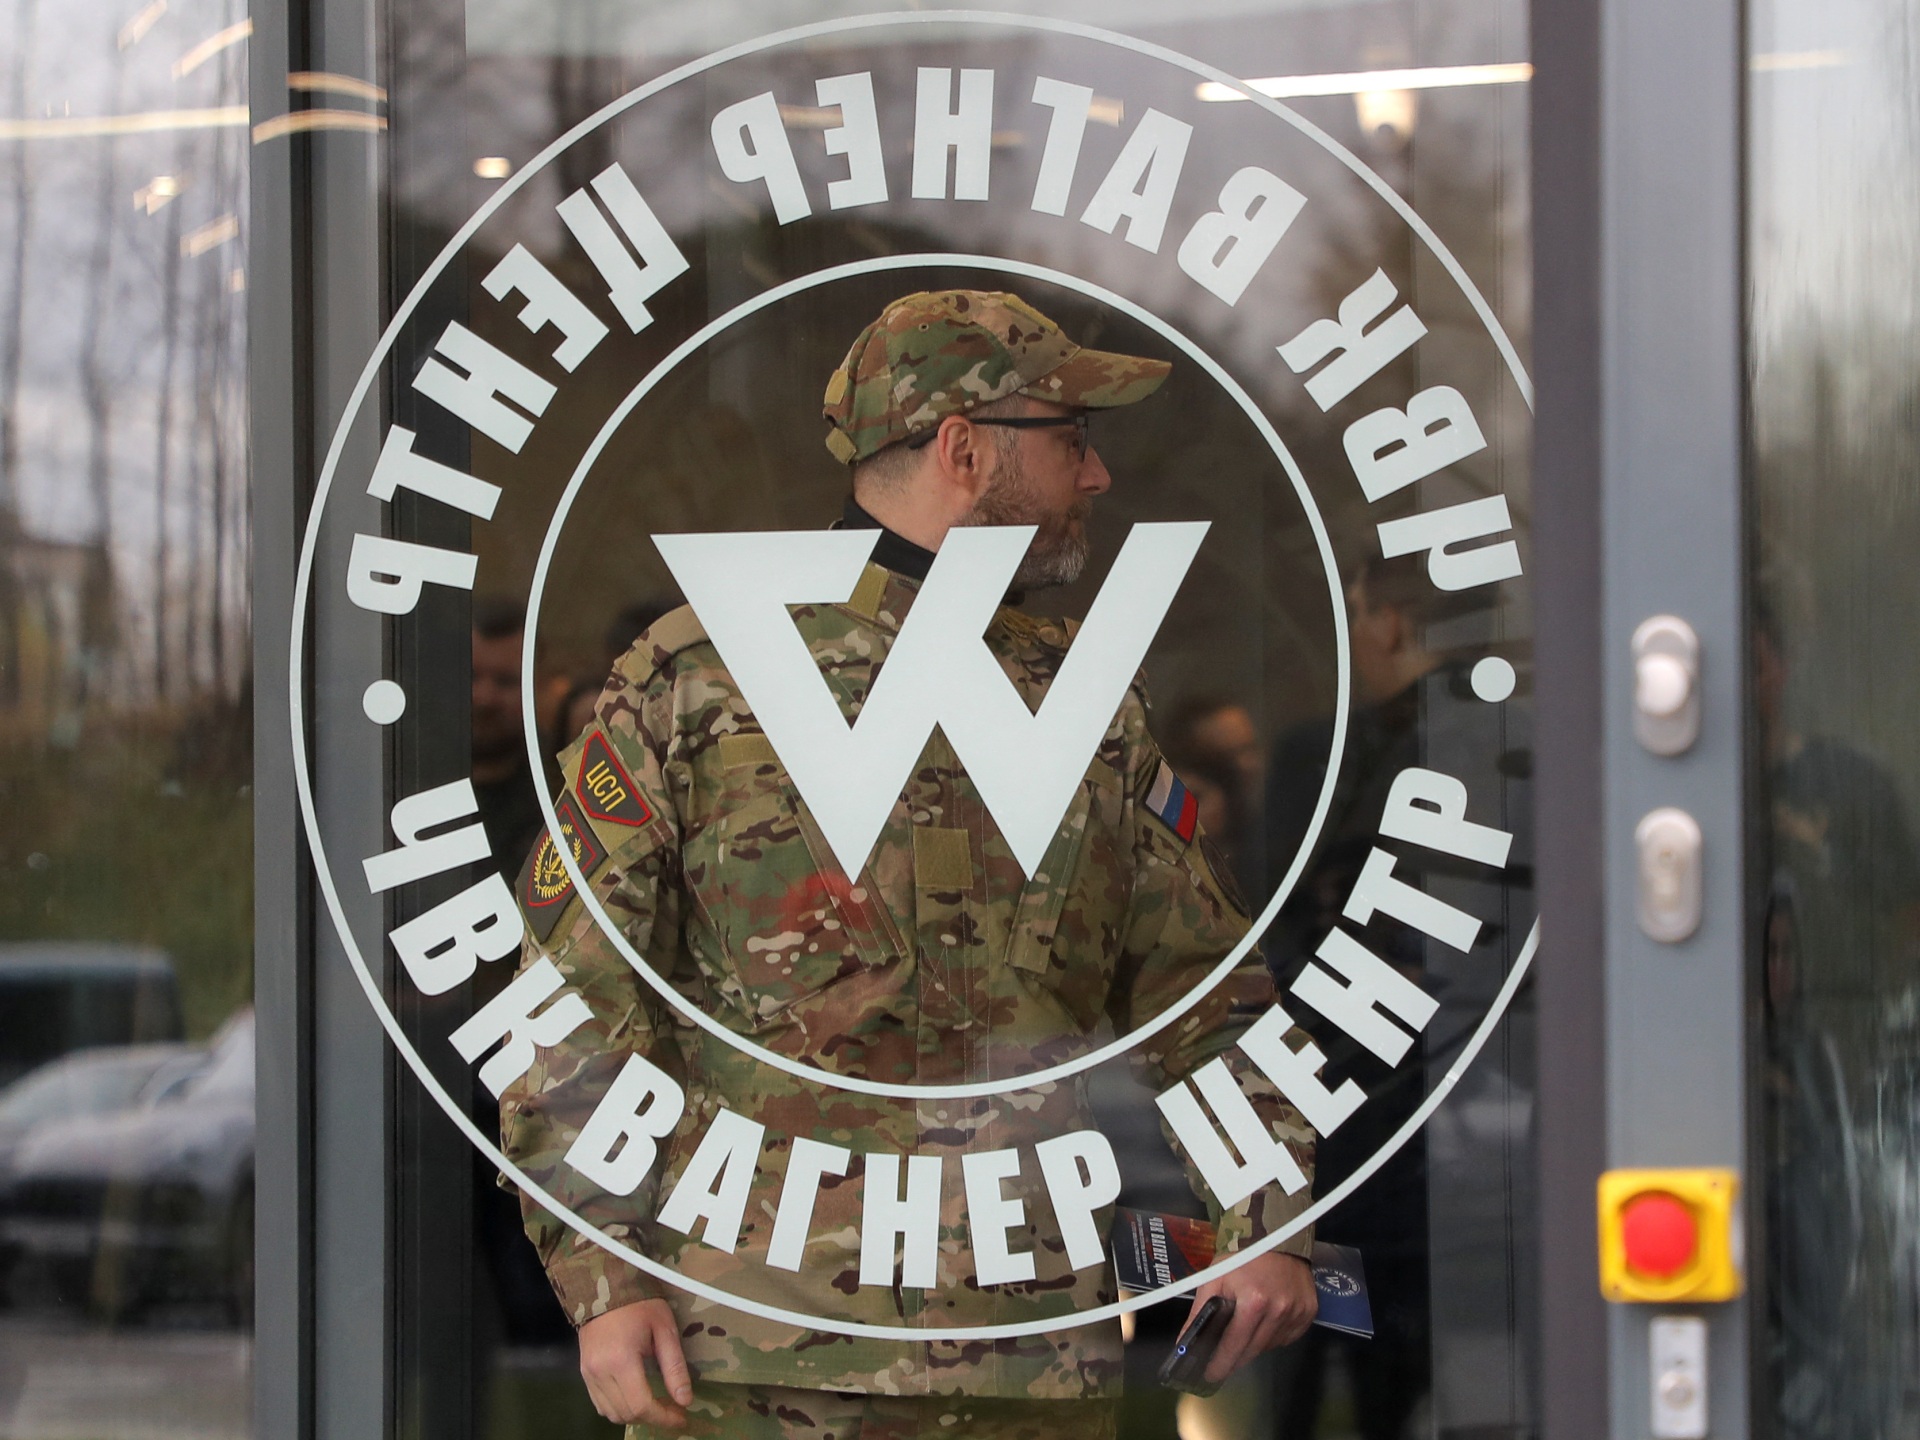 Russian mercenary force Wagner opens first official headquarters